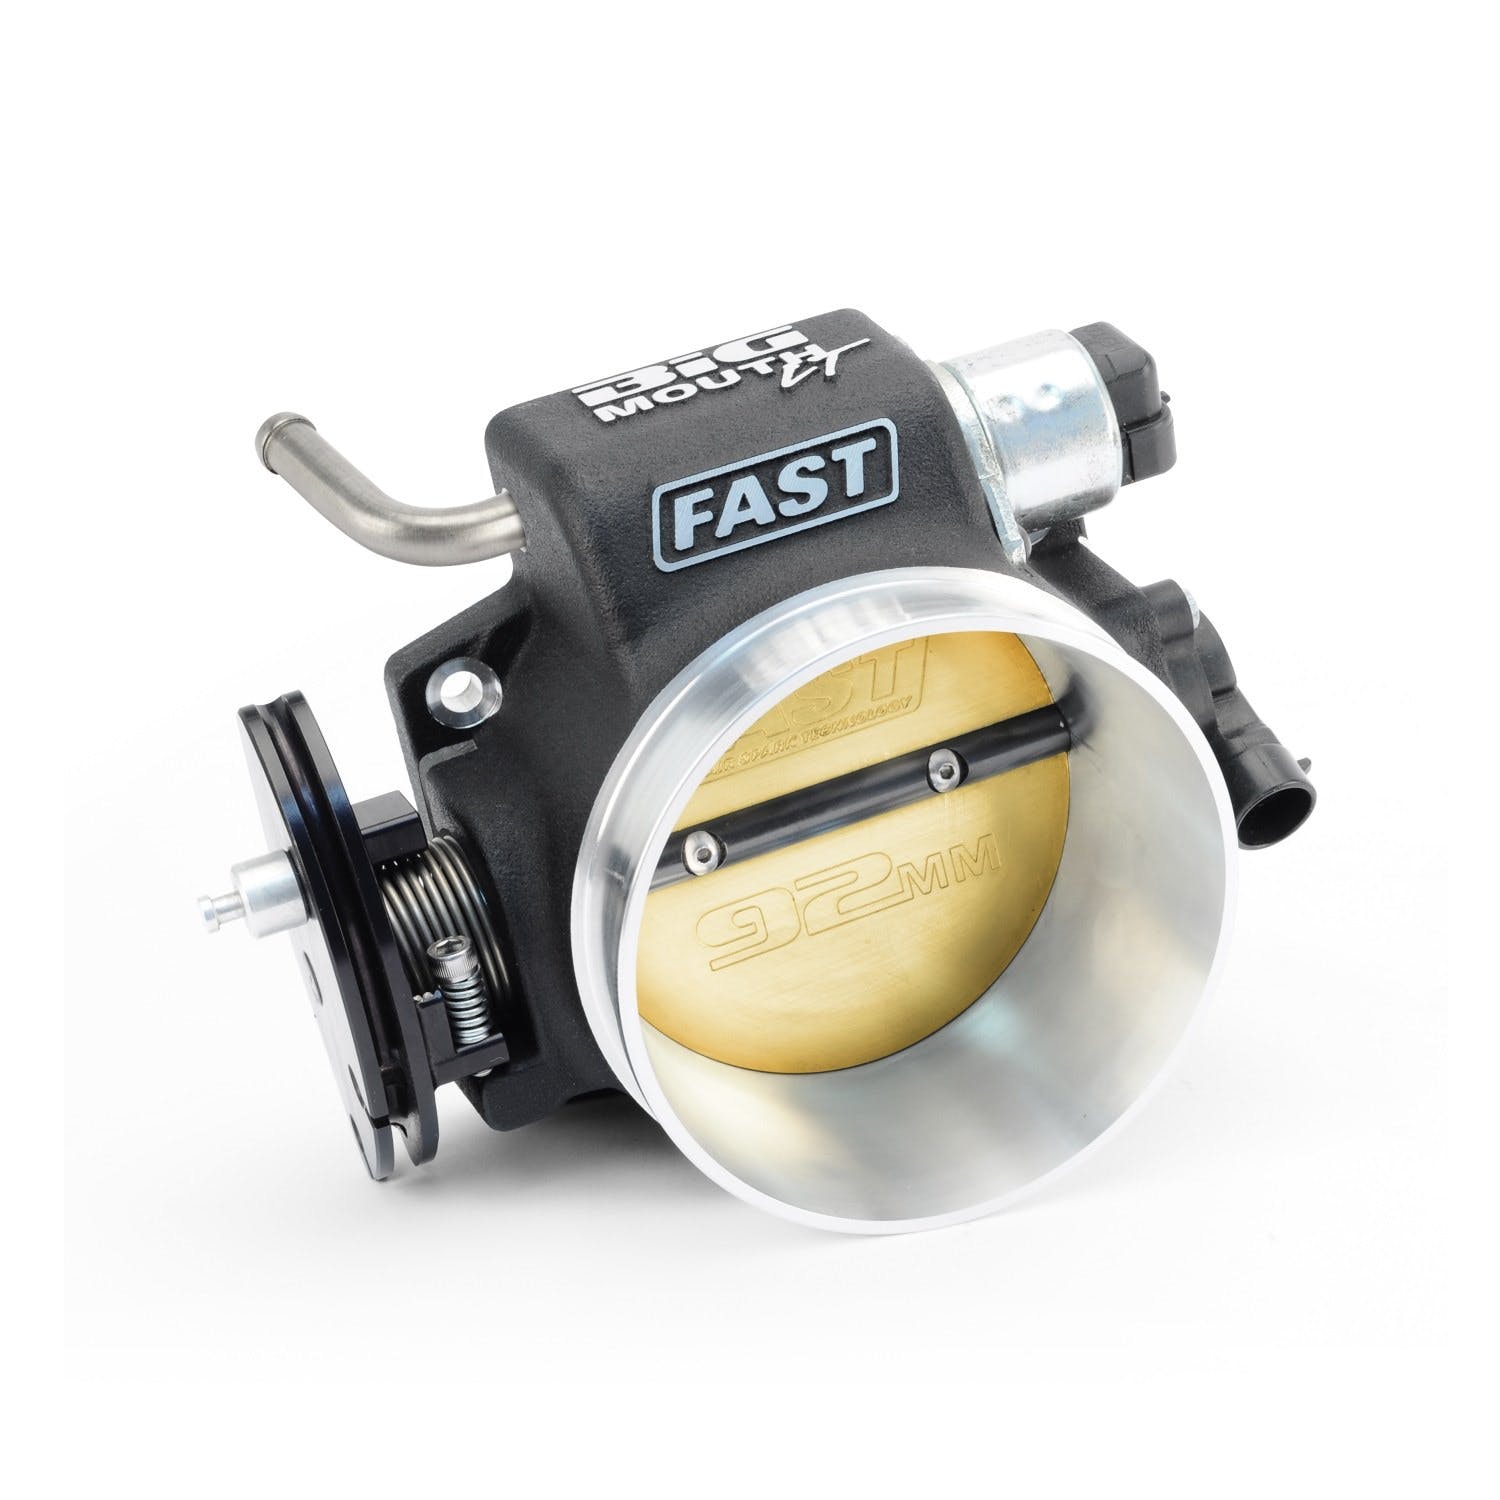 FAST - Fuel Air Spark Technology 54090 Fuel Injection Throttle Body